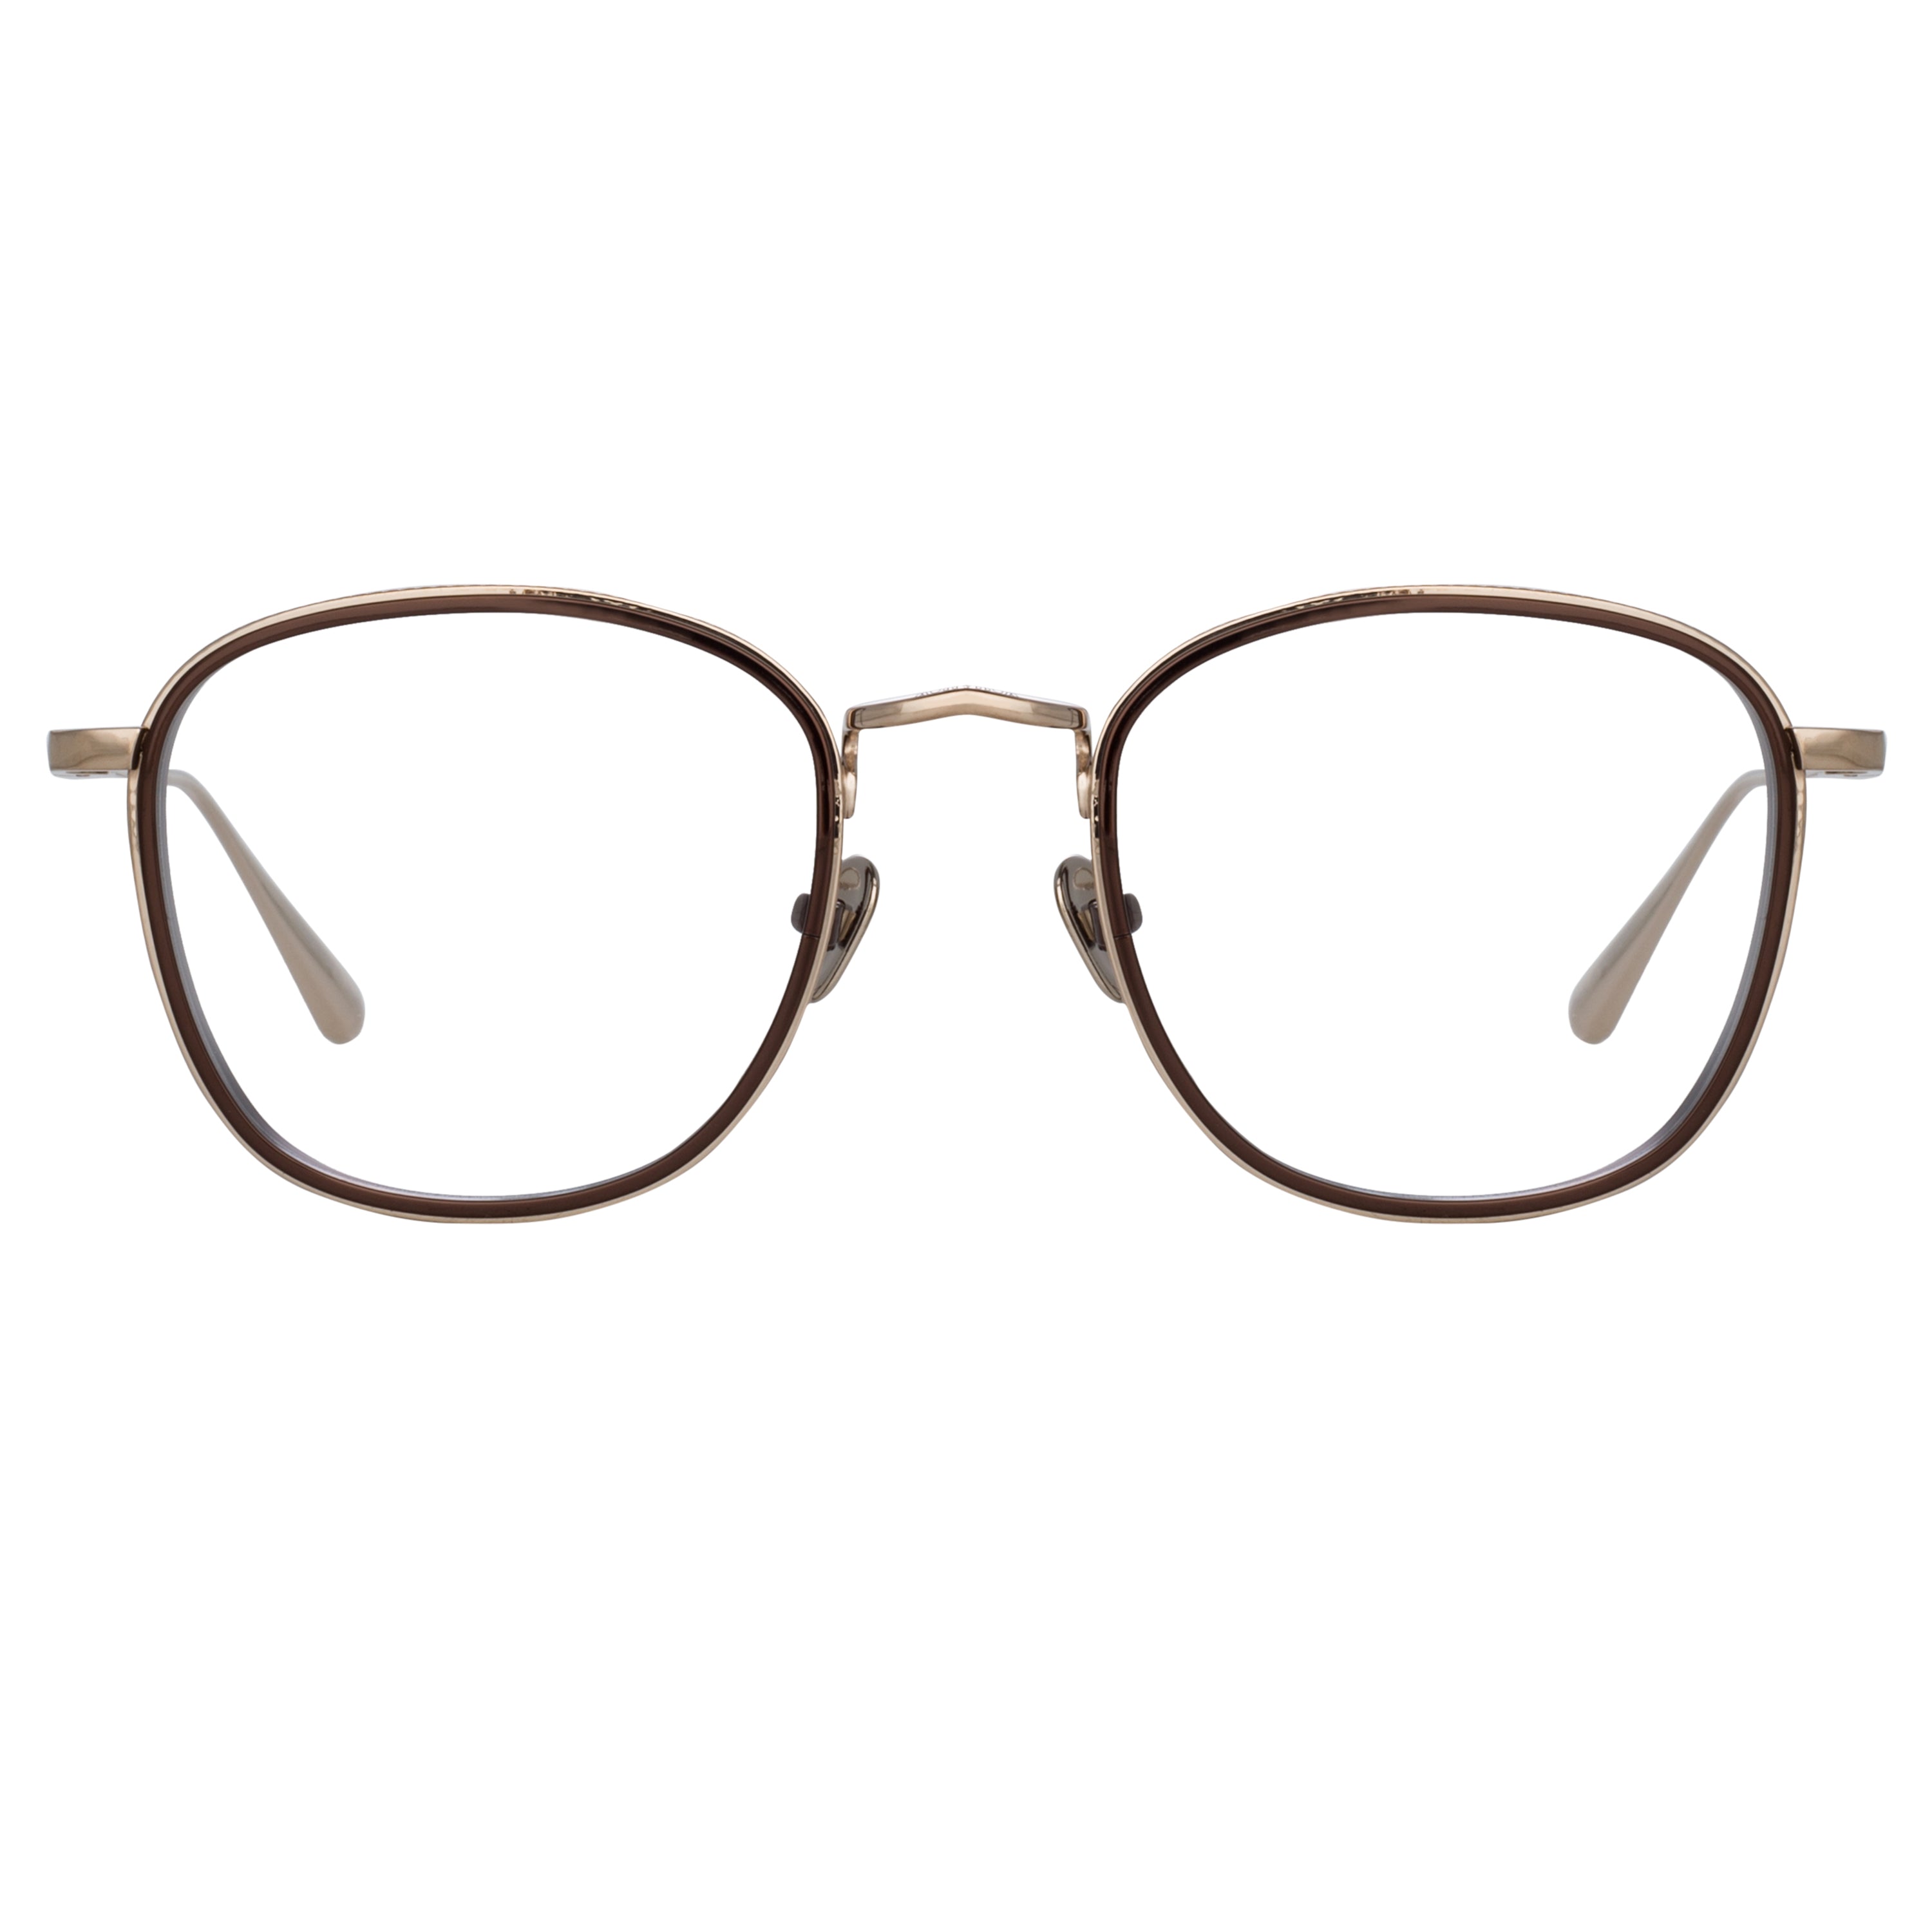 Maco Squared Optical Frame in Light Gold